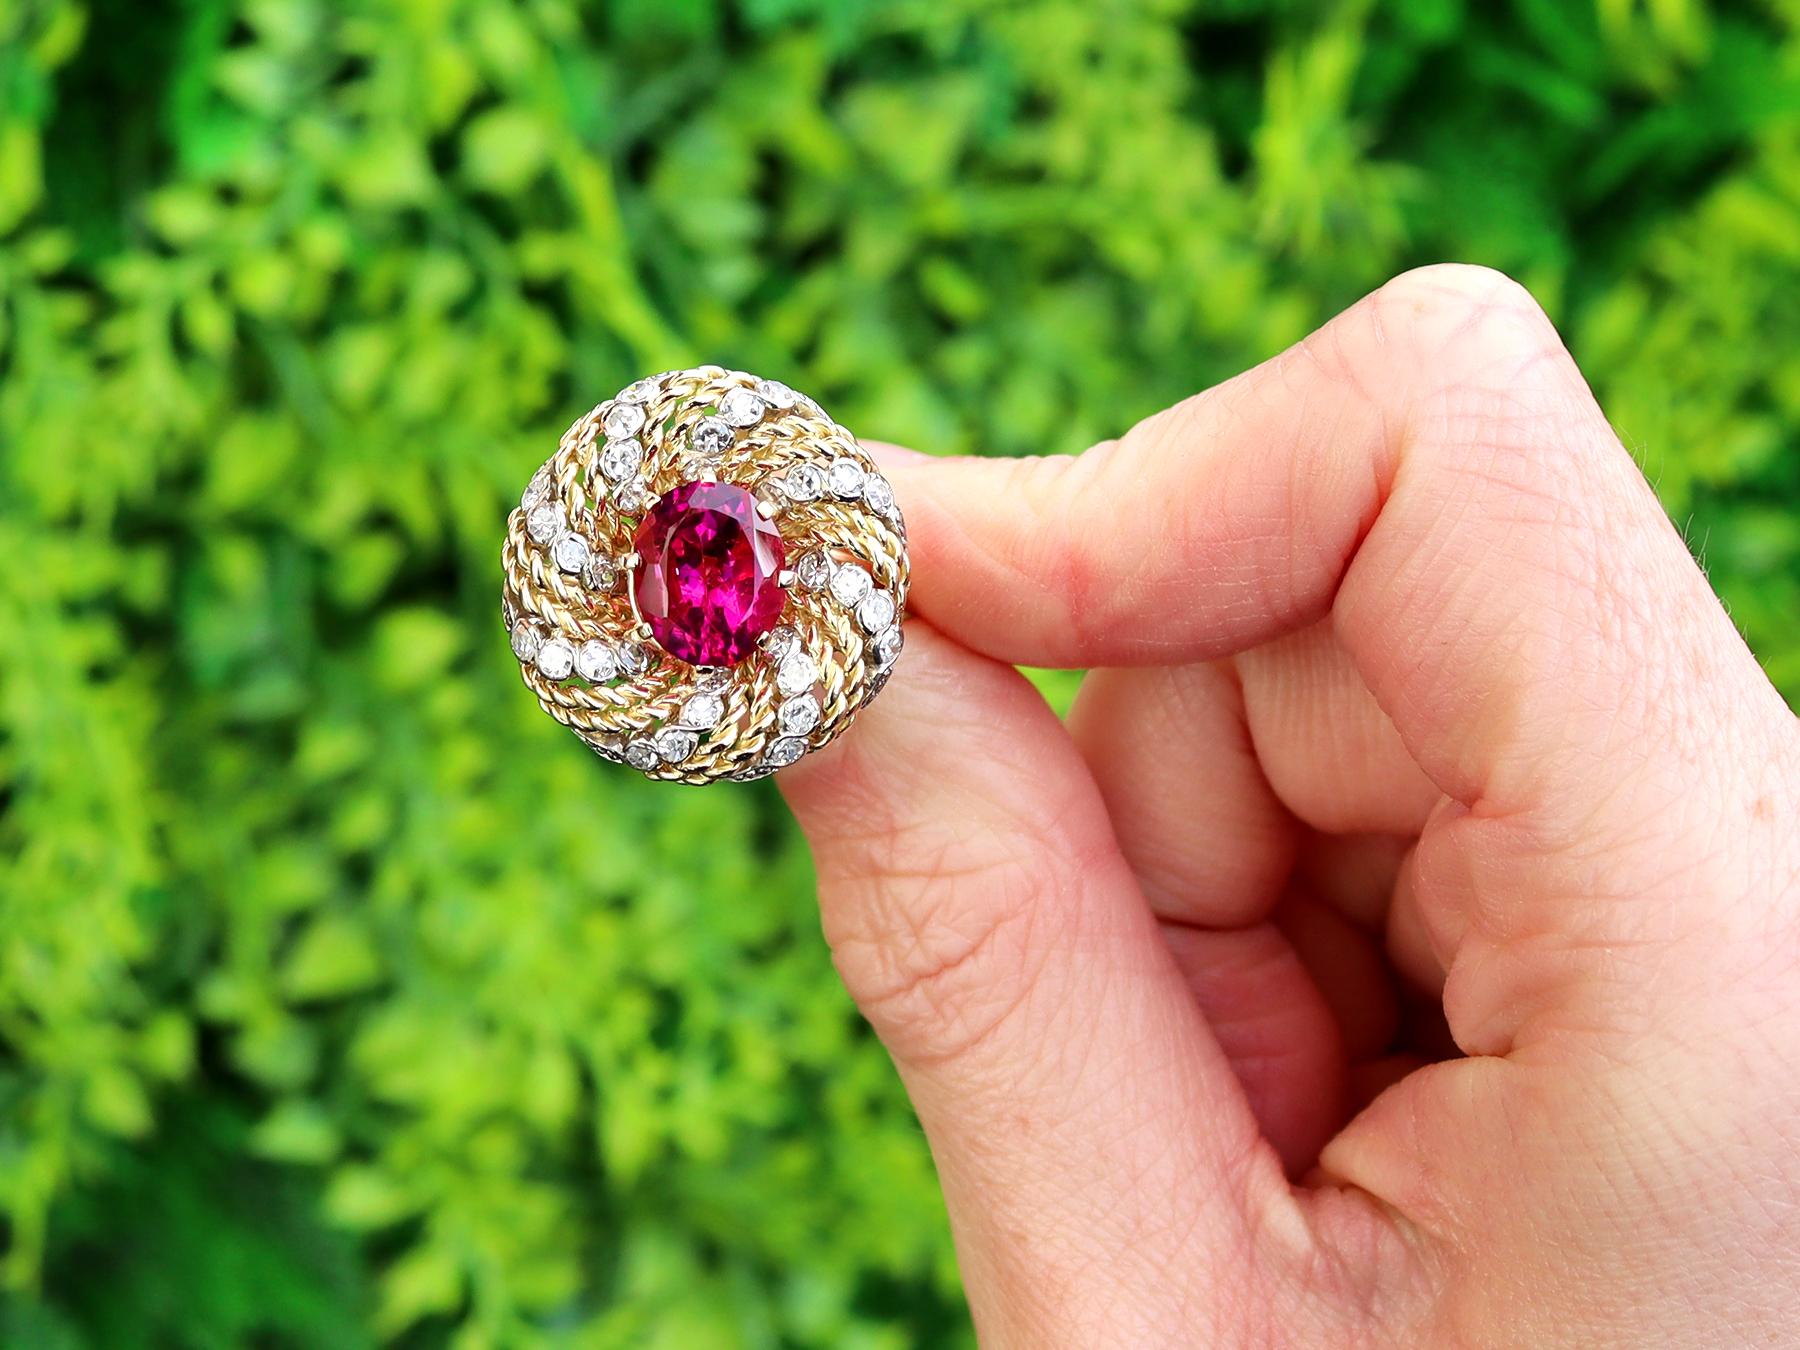 A stunning, fine and impressive vintage 3.75 carat tourmaline and 0.96 carat diamond, 18 karat yellow and white gold set dress ring; part of our diverse vintage jewellery and estate jewelry collections.

This stunning, fine and impressive vintage